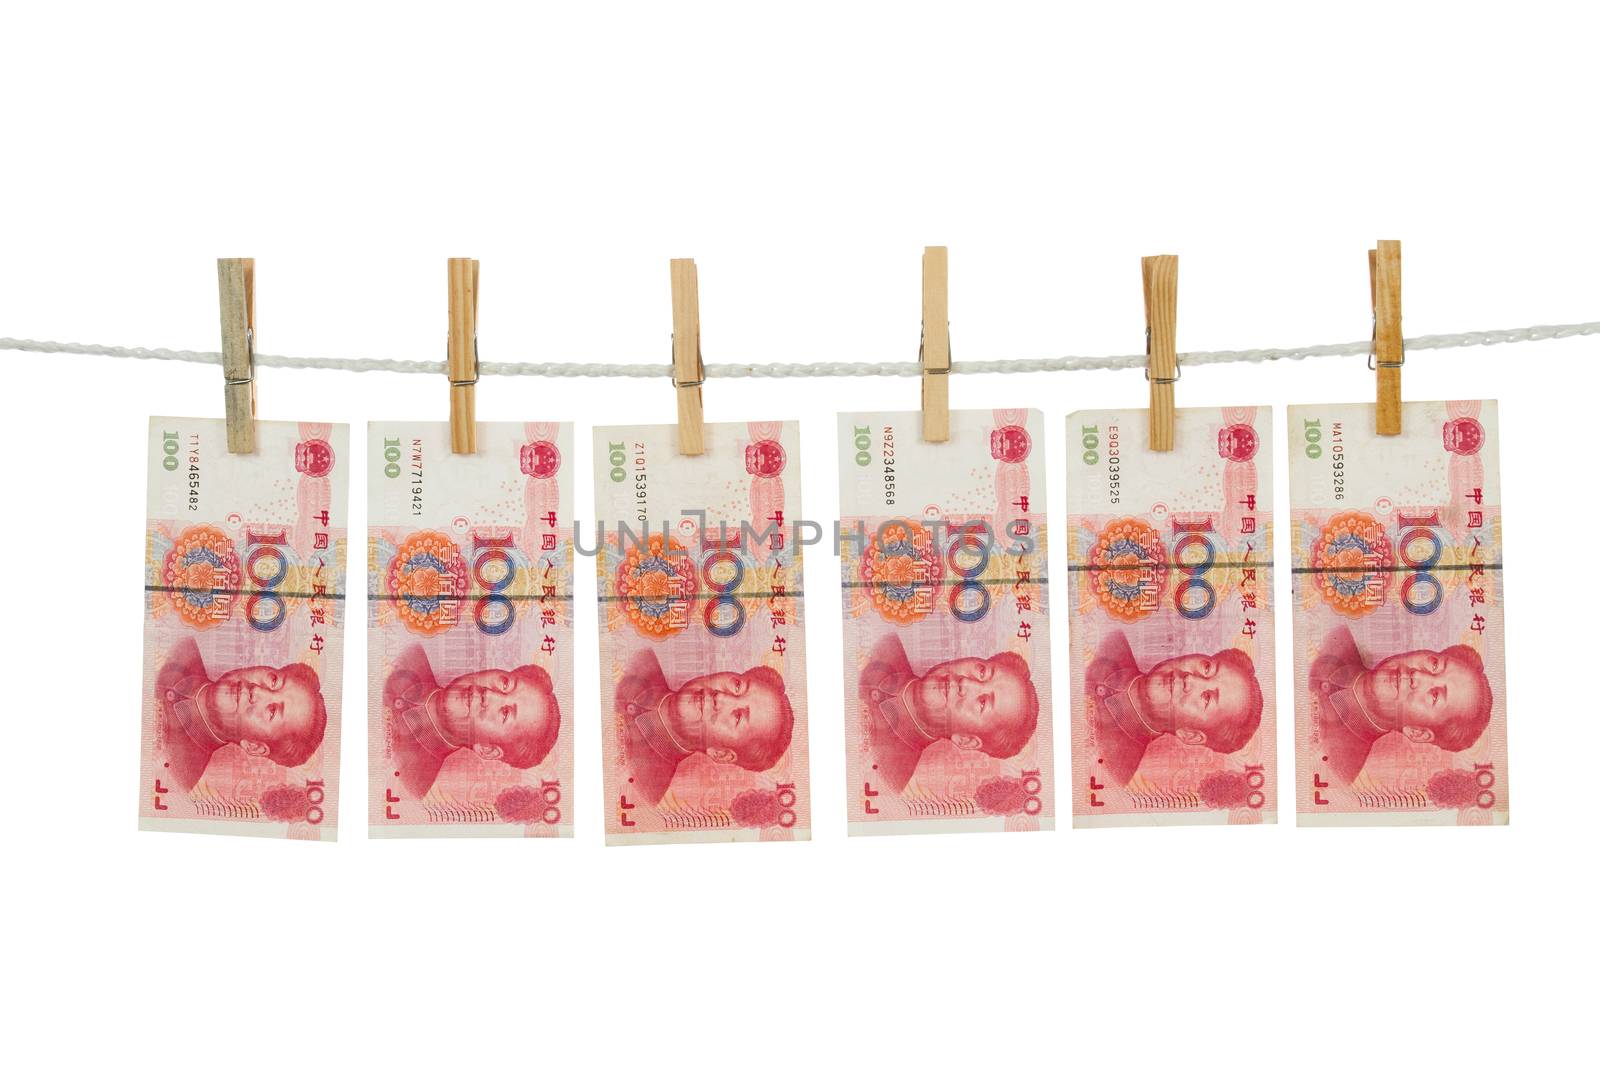 Money laundering concept with China notes on clothesline in plain isolated white background.